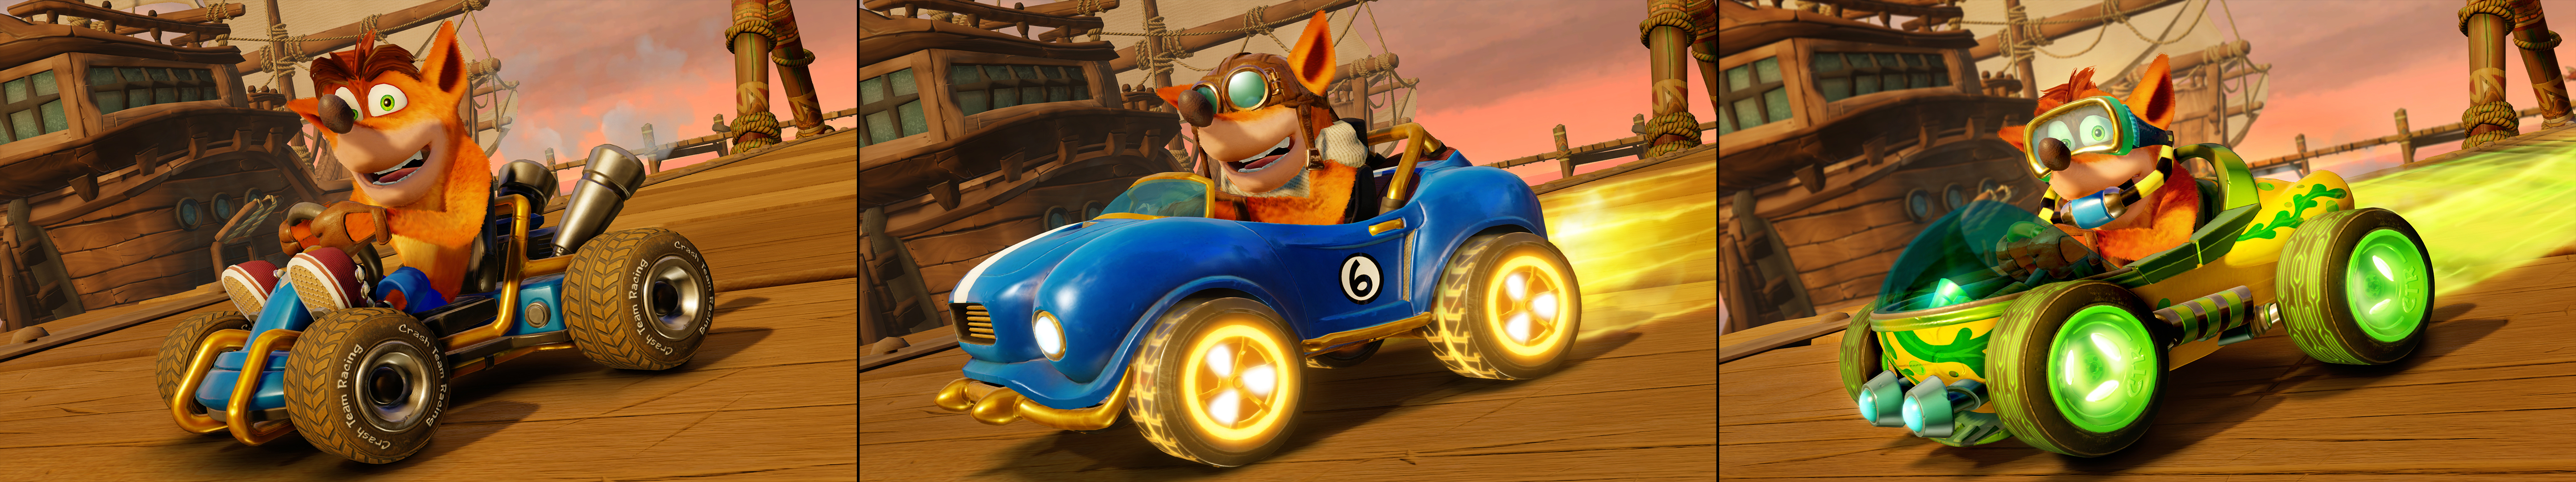 Crash Team Racing Nitro-Fueled details character types, more on  customization